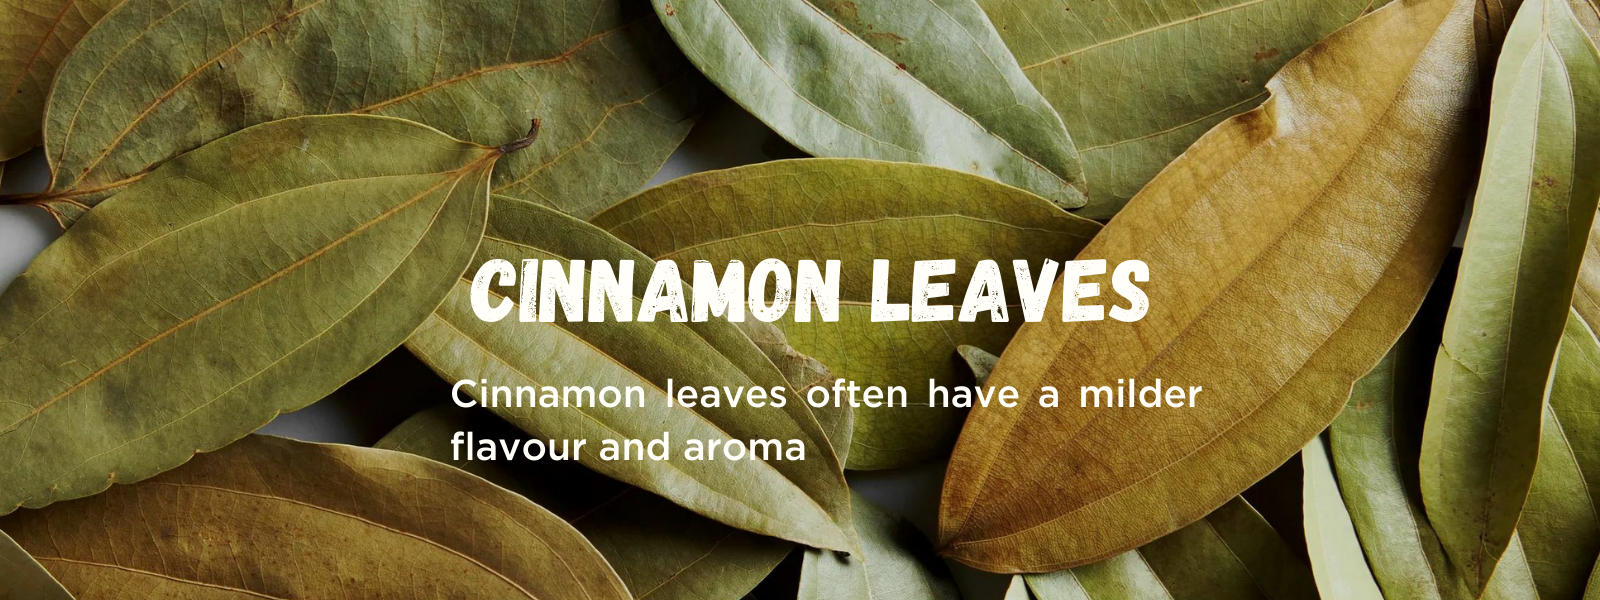 Cinnamon Leaves - Health Benefits, Uses and Important Facts